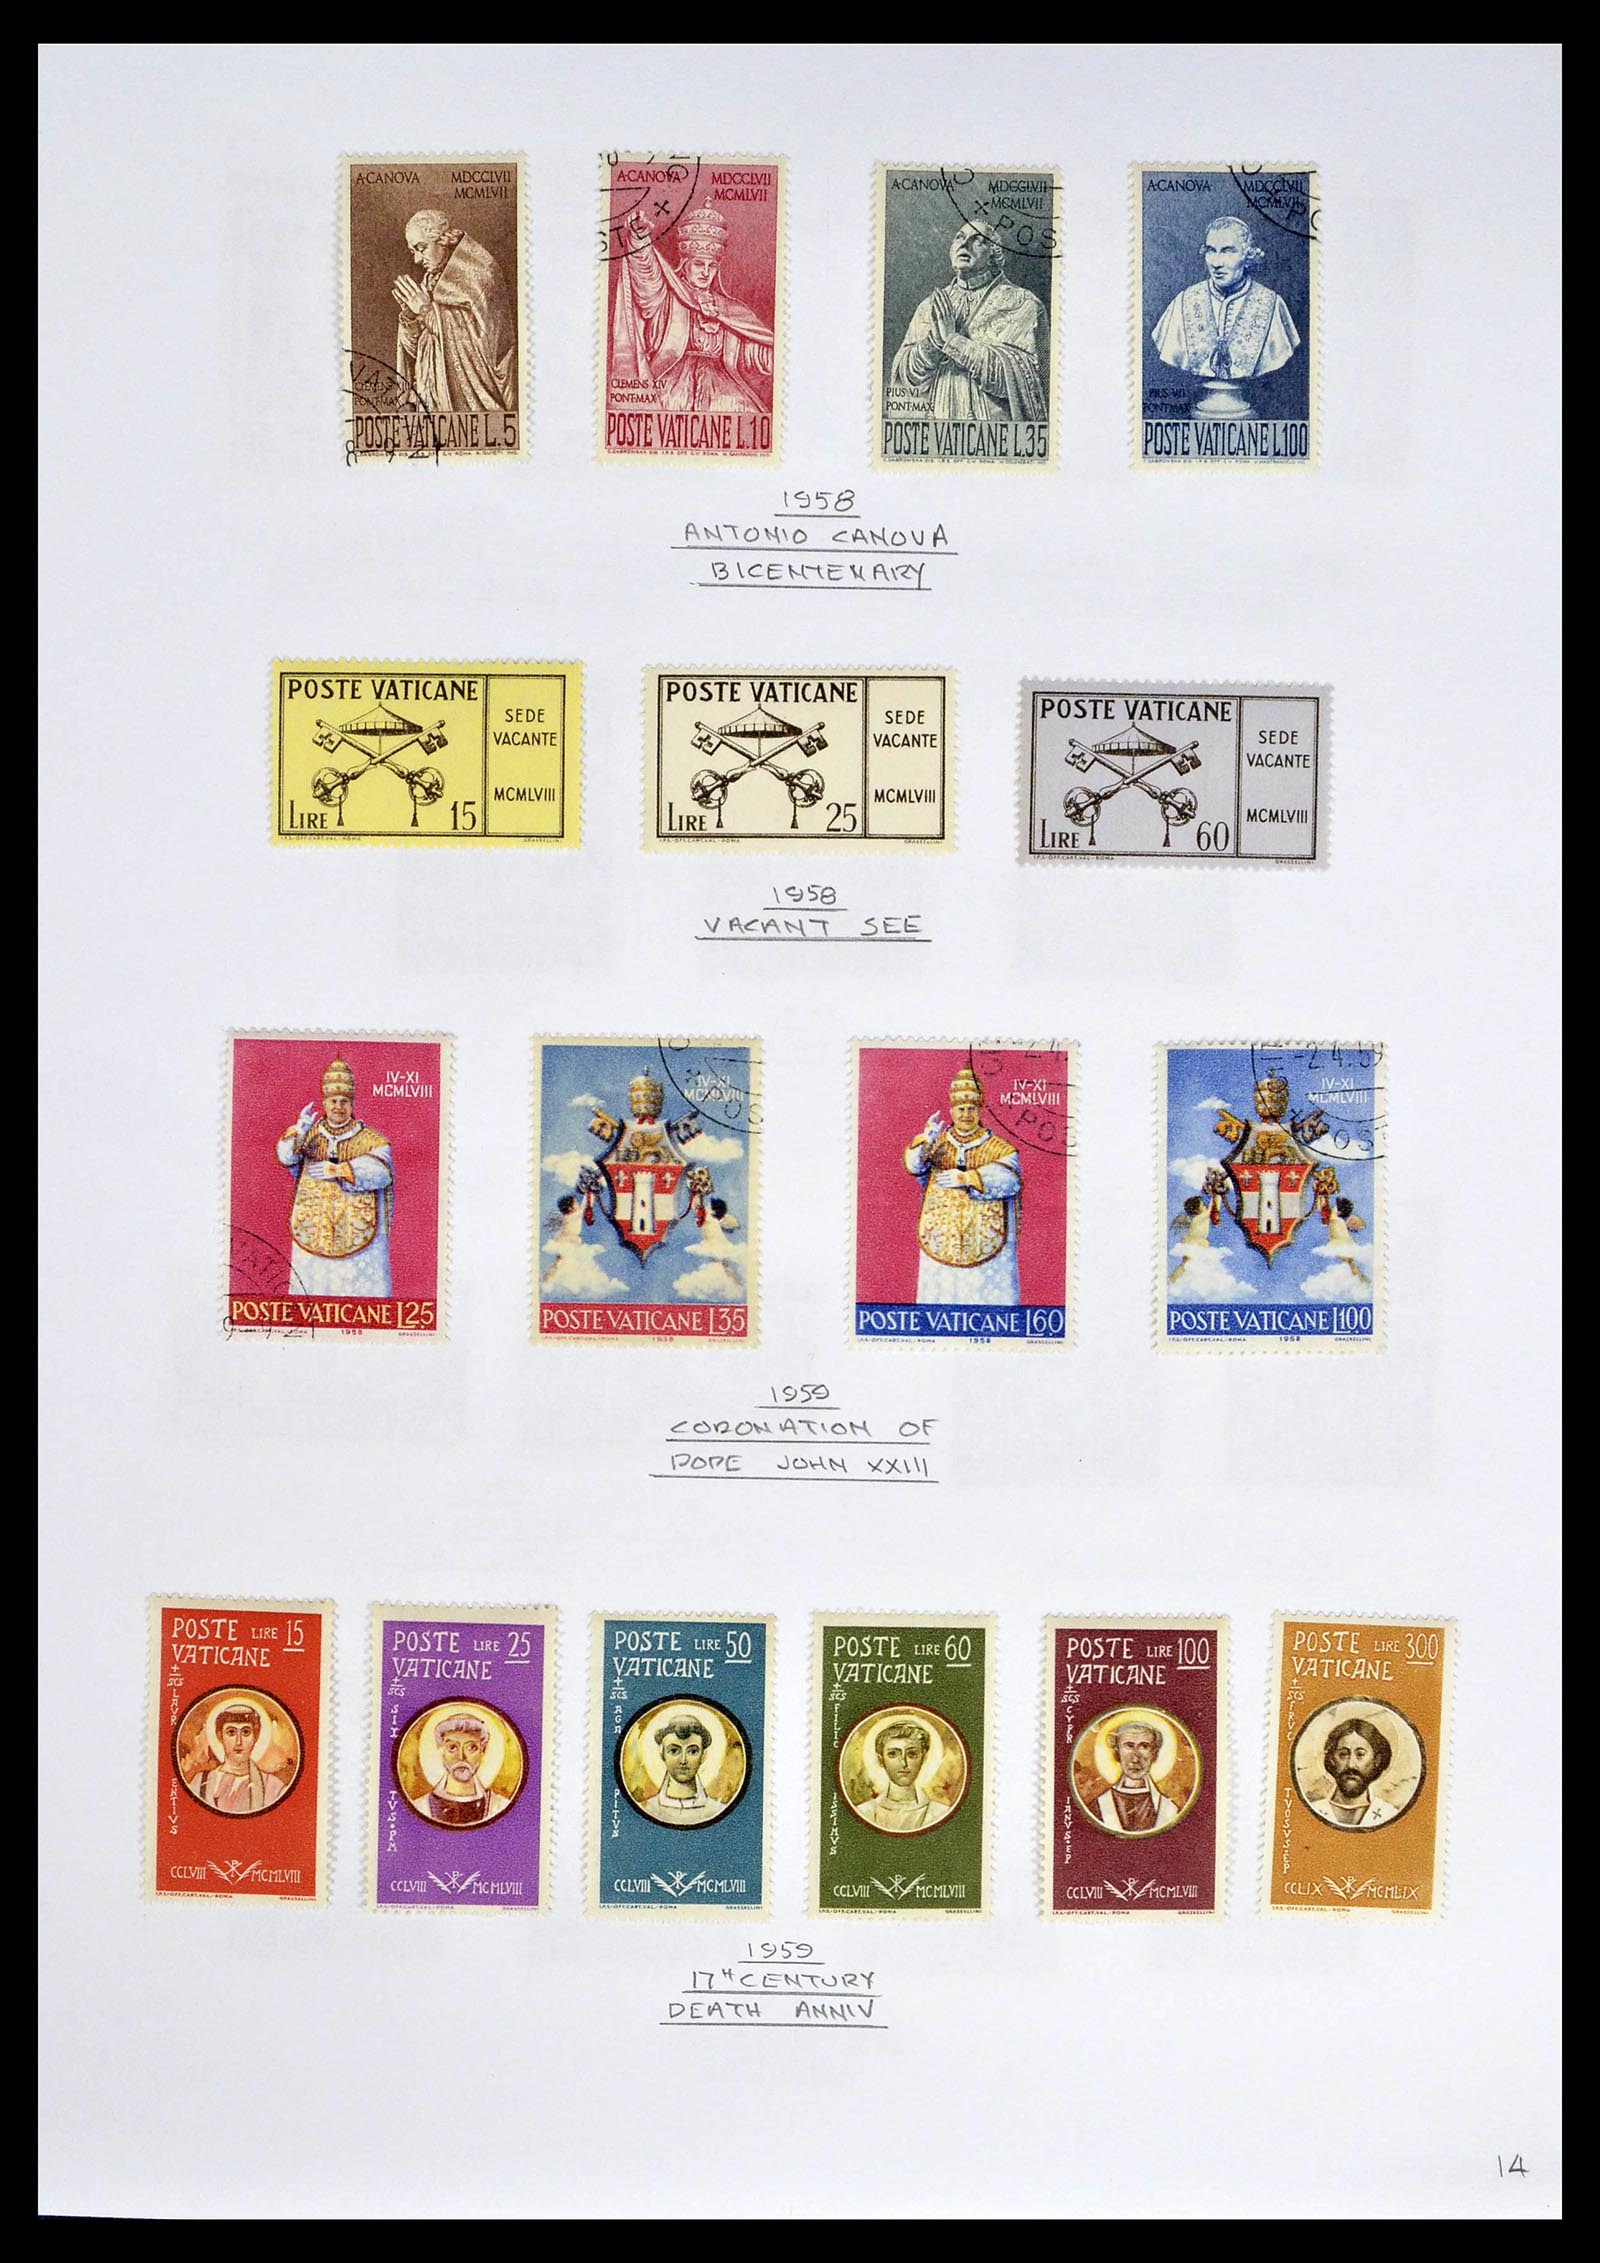 39099 0016 - Stamp collection 39099 Vatican 1852-2008.